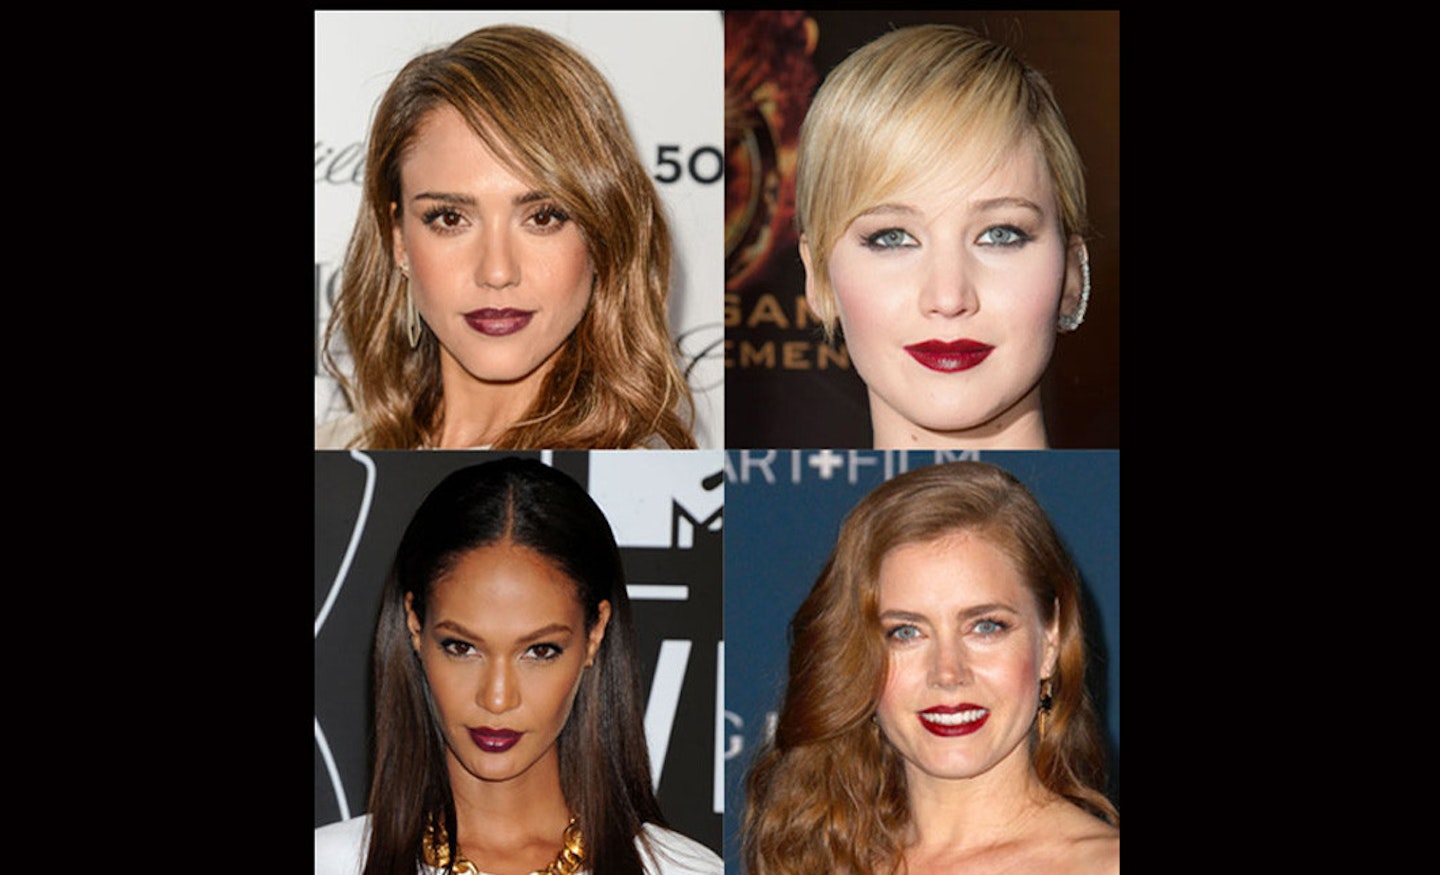 GALLERY>> THE TOP 10 BERRY LIPS